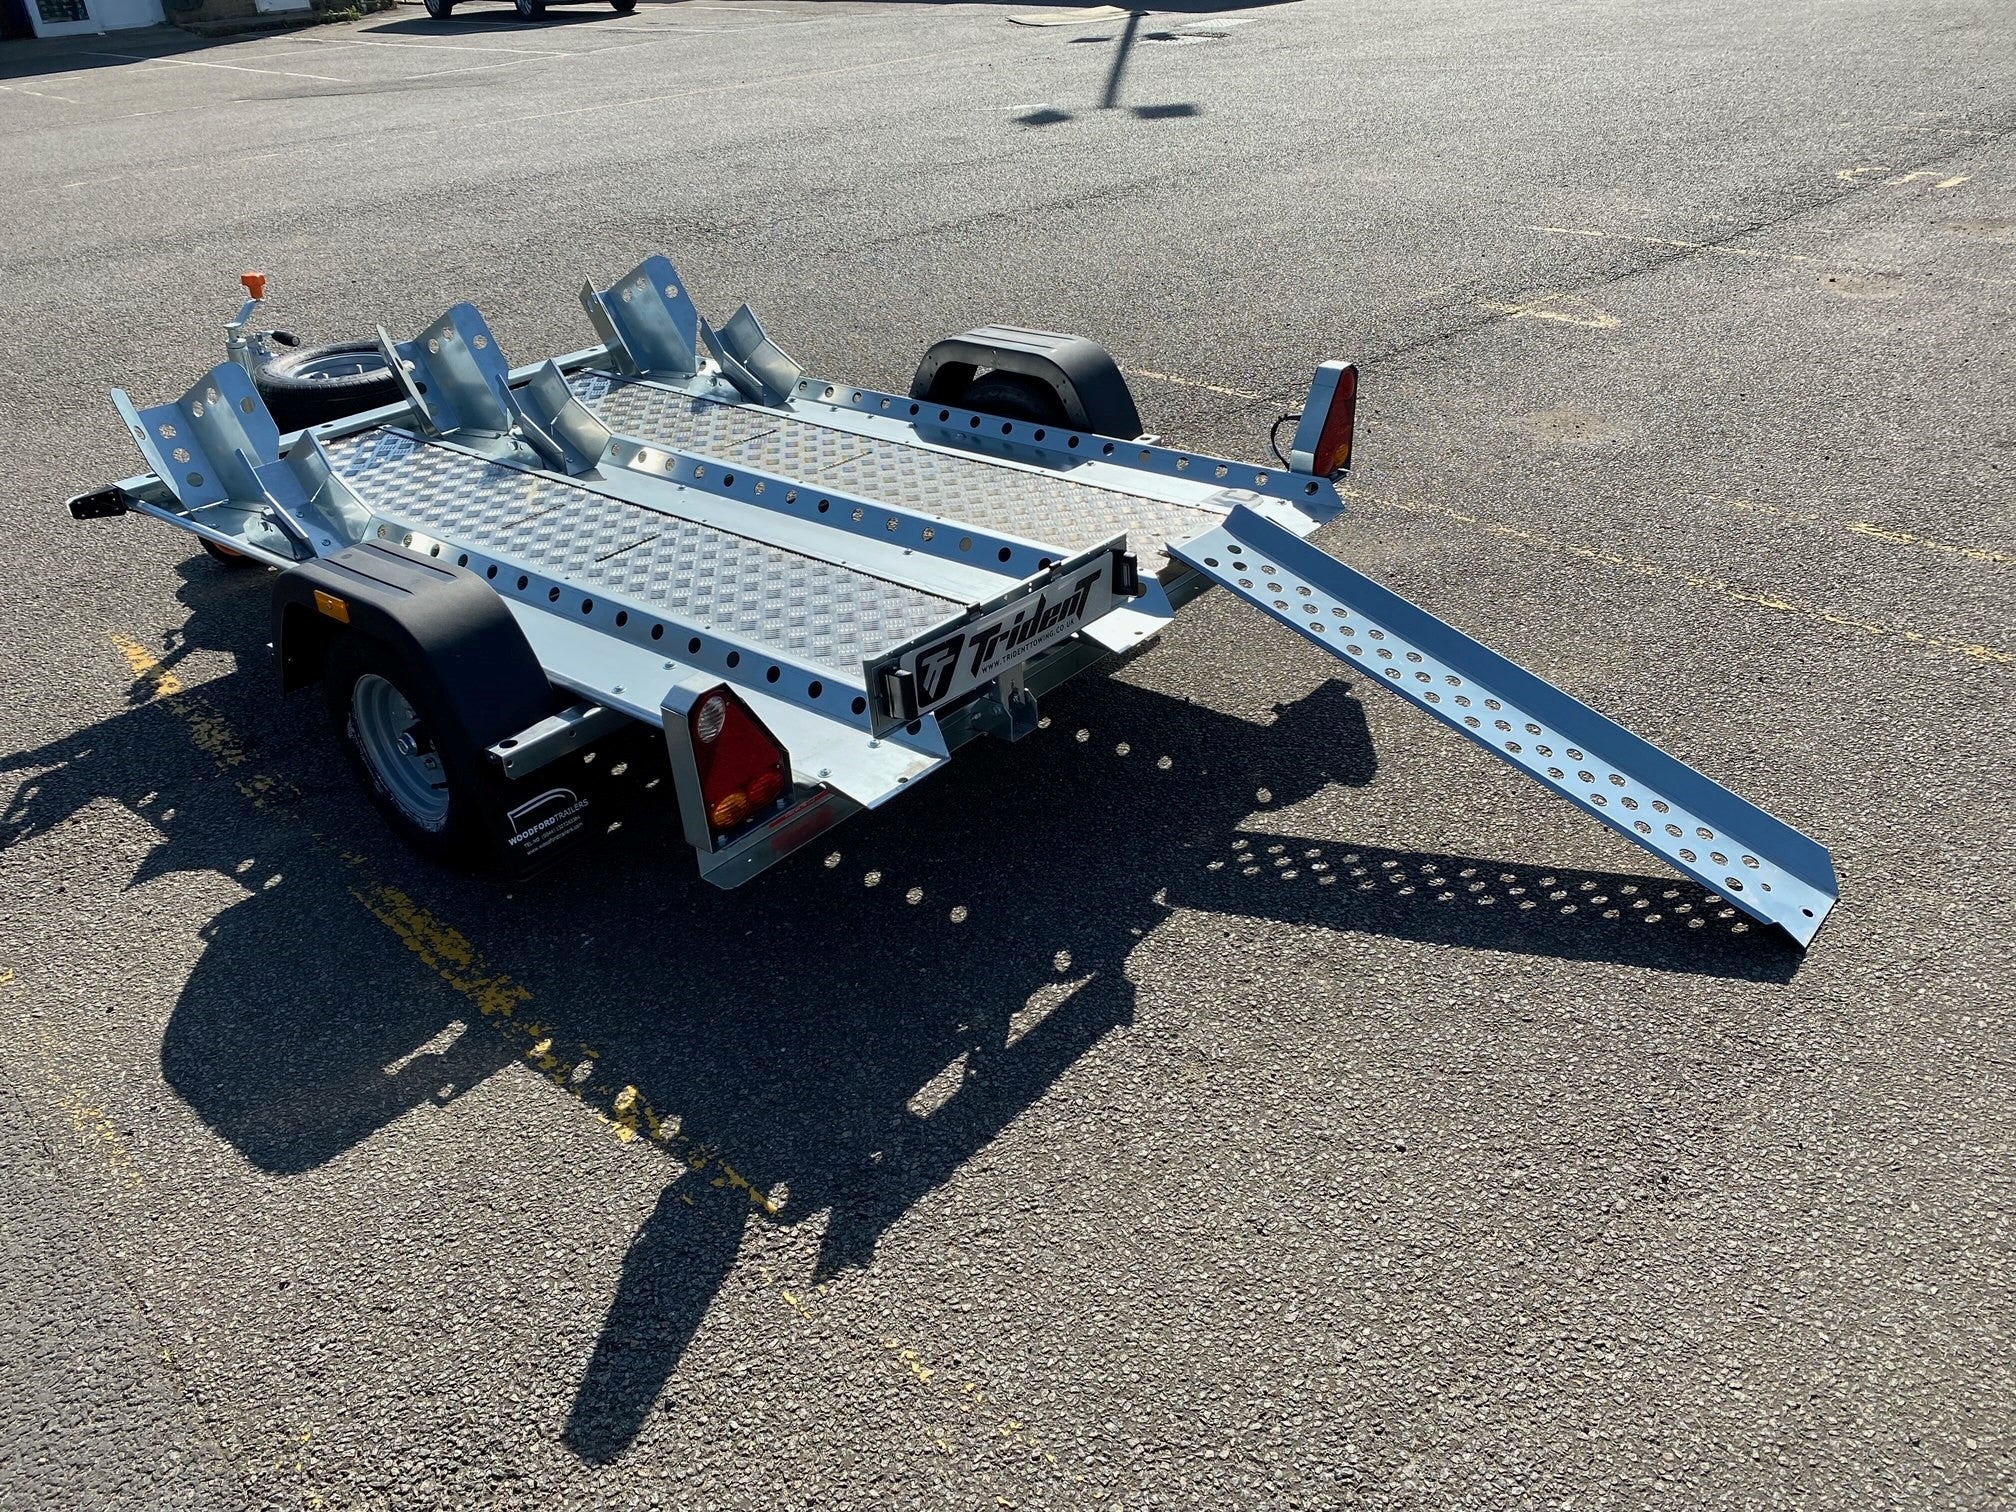 Motorcycle Trailers for Hire